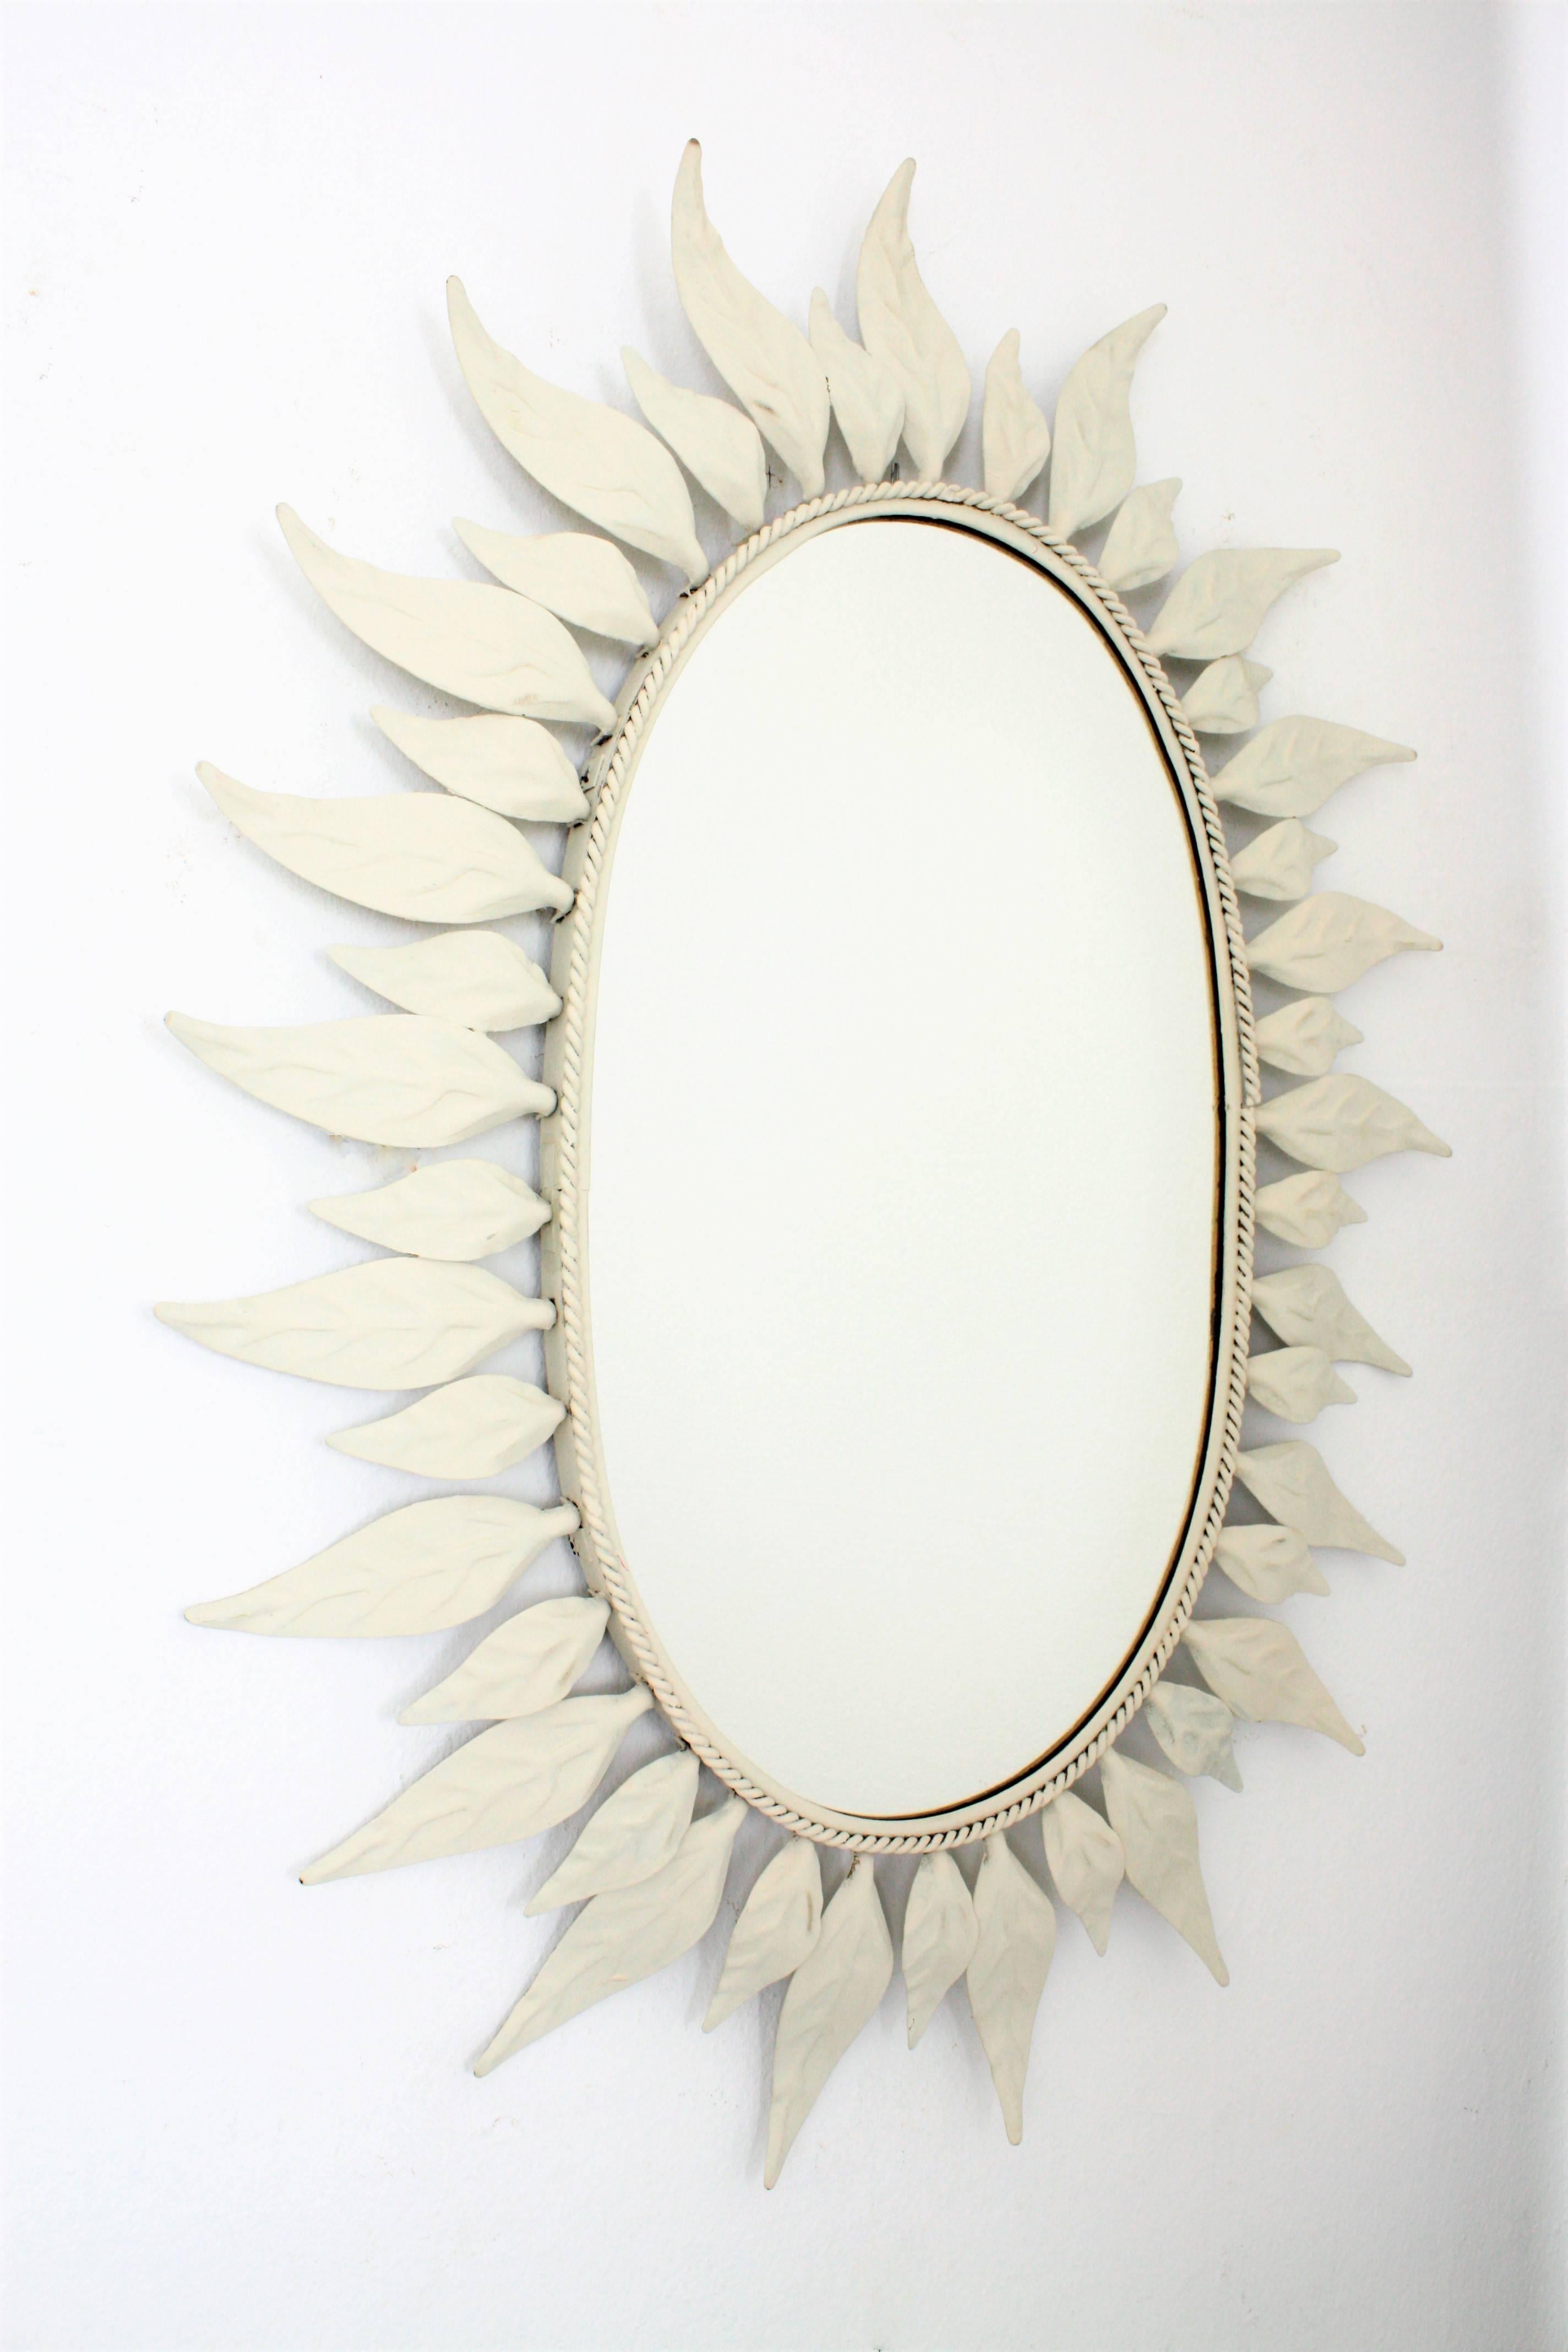 Lovely oval sunburst or flower burst mirror with a frame of leaves in two sizes and a white painted finish. Spain, 1960s.
Beautiful to create a fresh wall decoration with other mirrors in soft colors and also mixed with bamboo and wicker